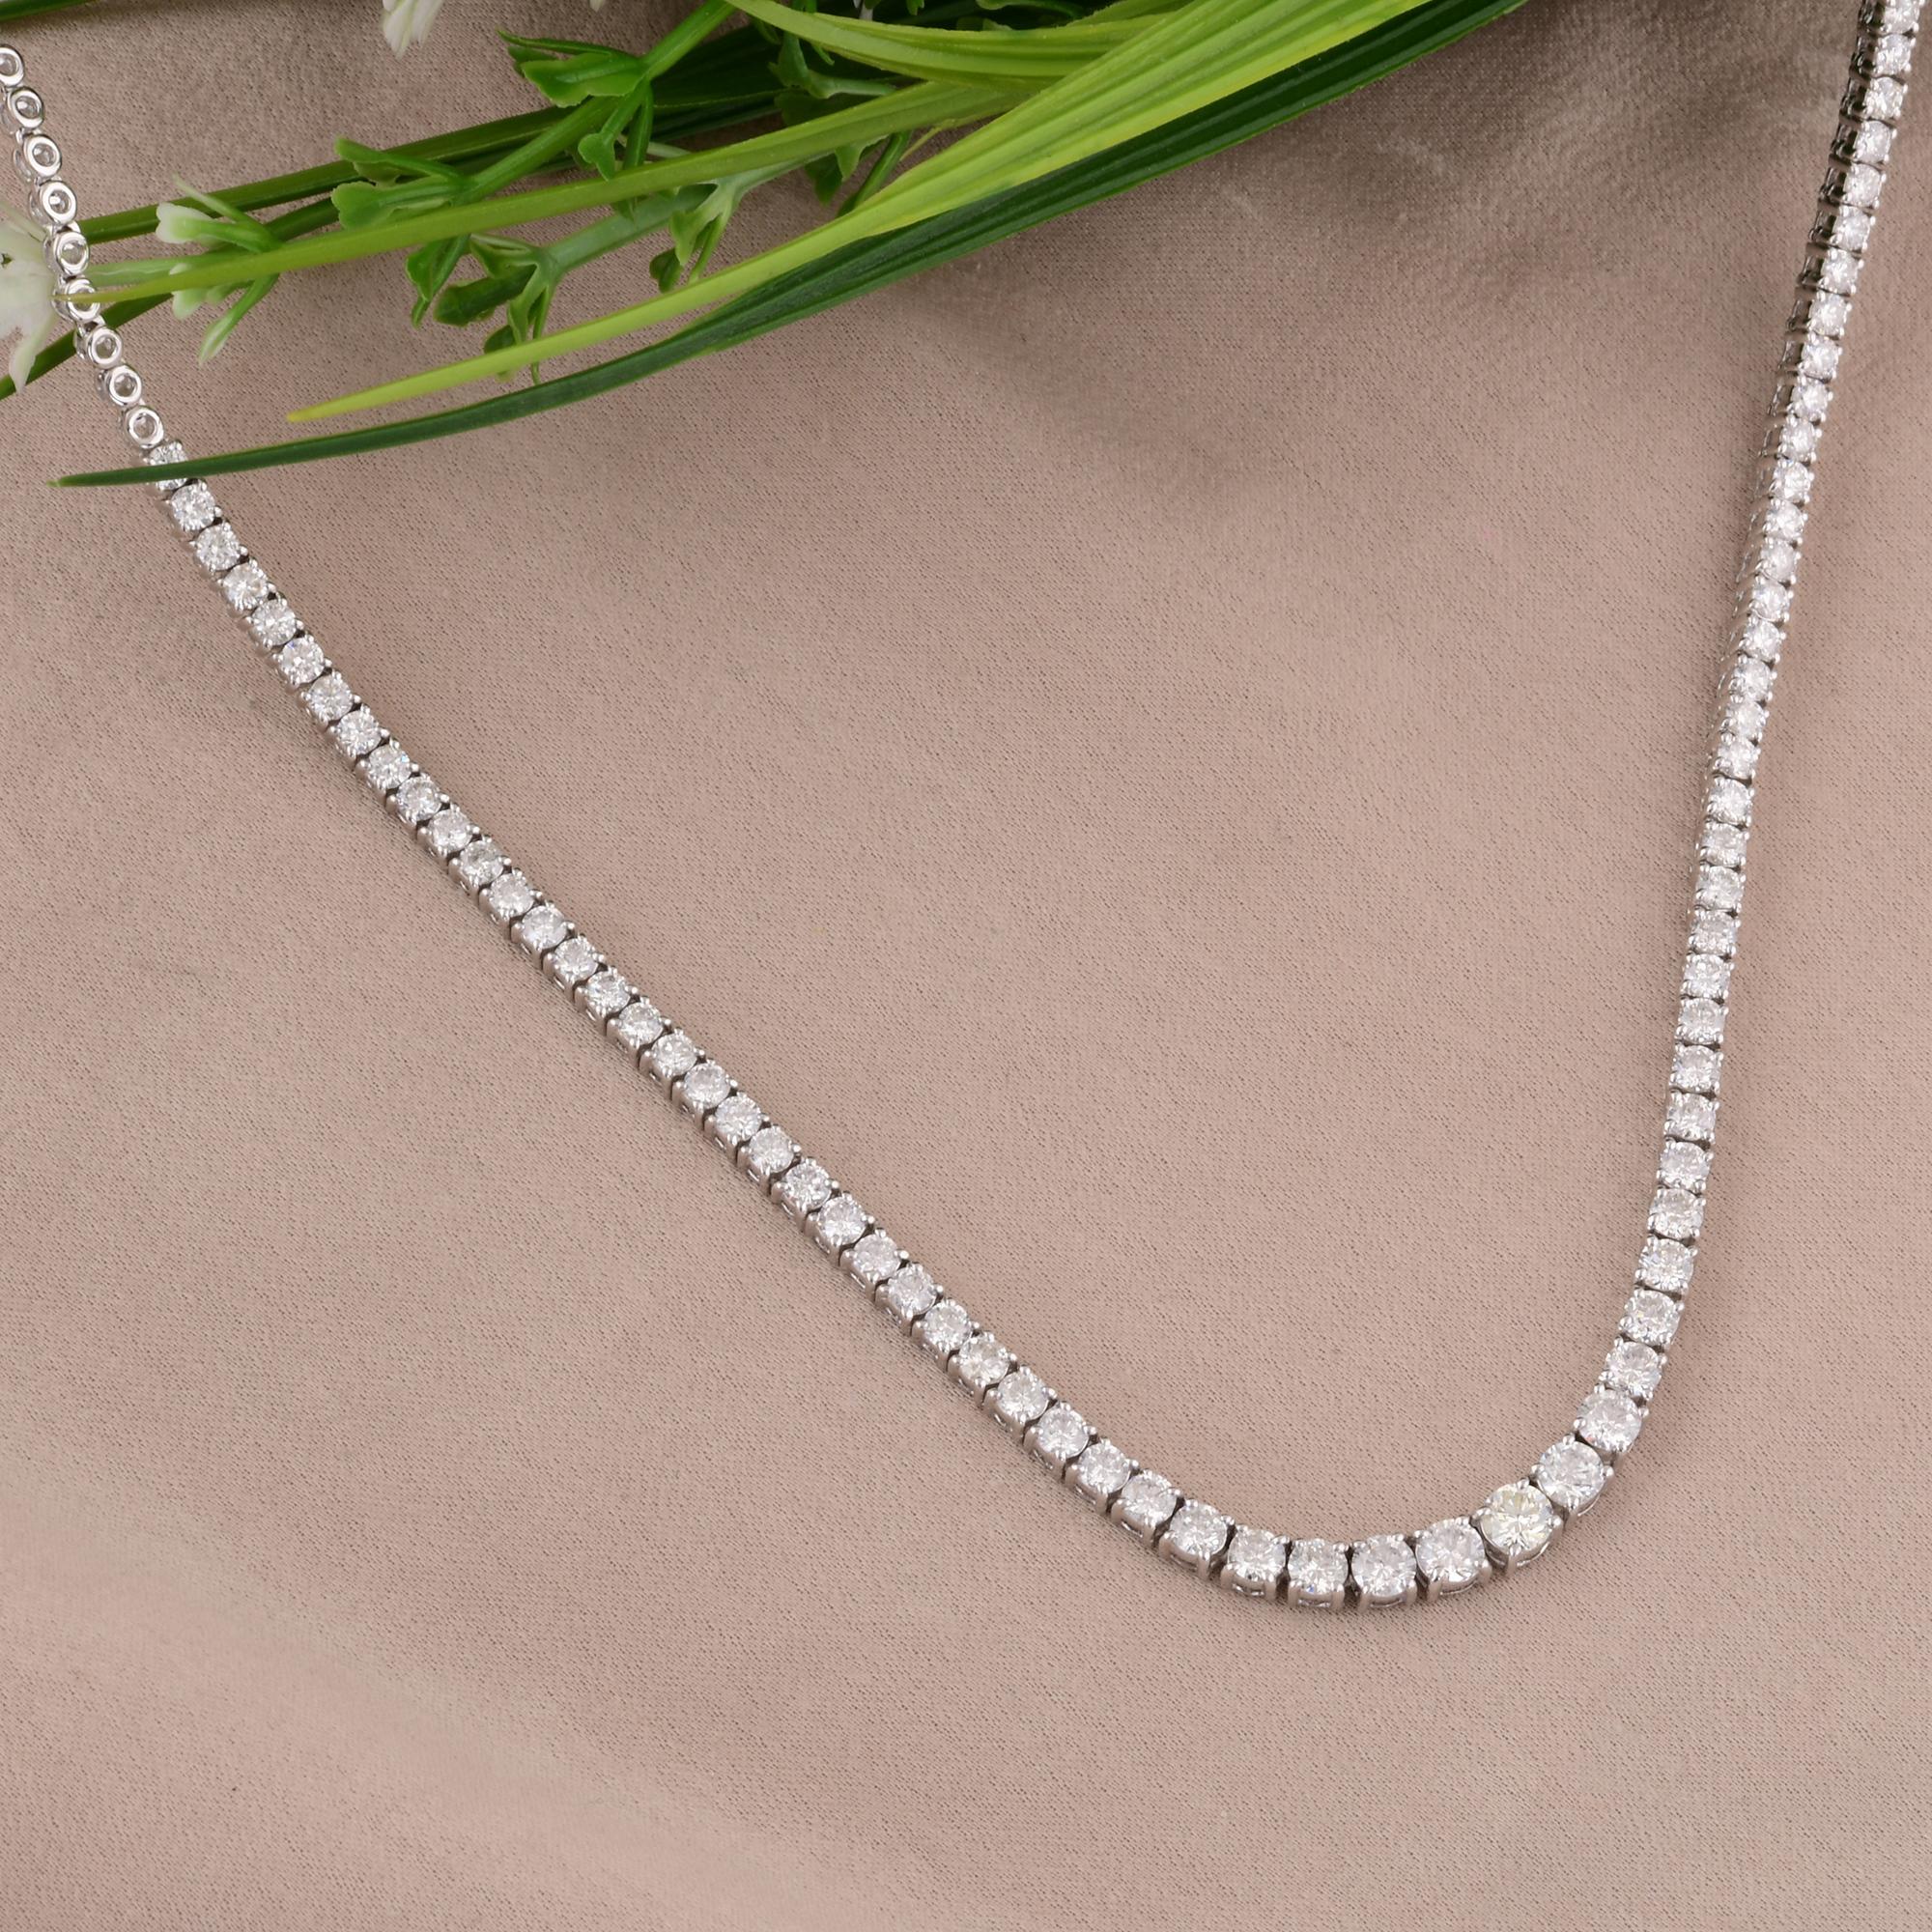 Each diamond is expertly set in a delicate chain crafted from luxurious 18 Karat White Gold, creating a seamless and fluid design that drapes gracefully around the neck. The polished gold enhances the brilliance of the diamonds while providing a